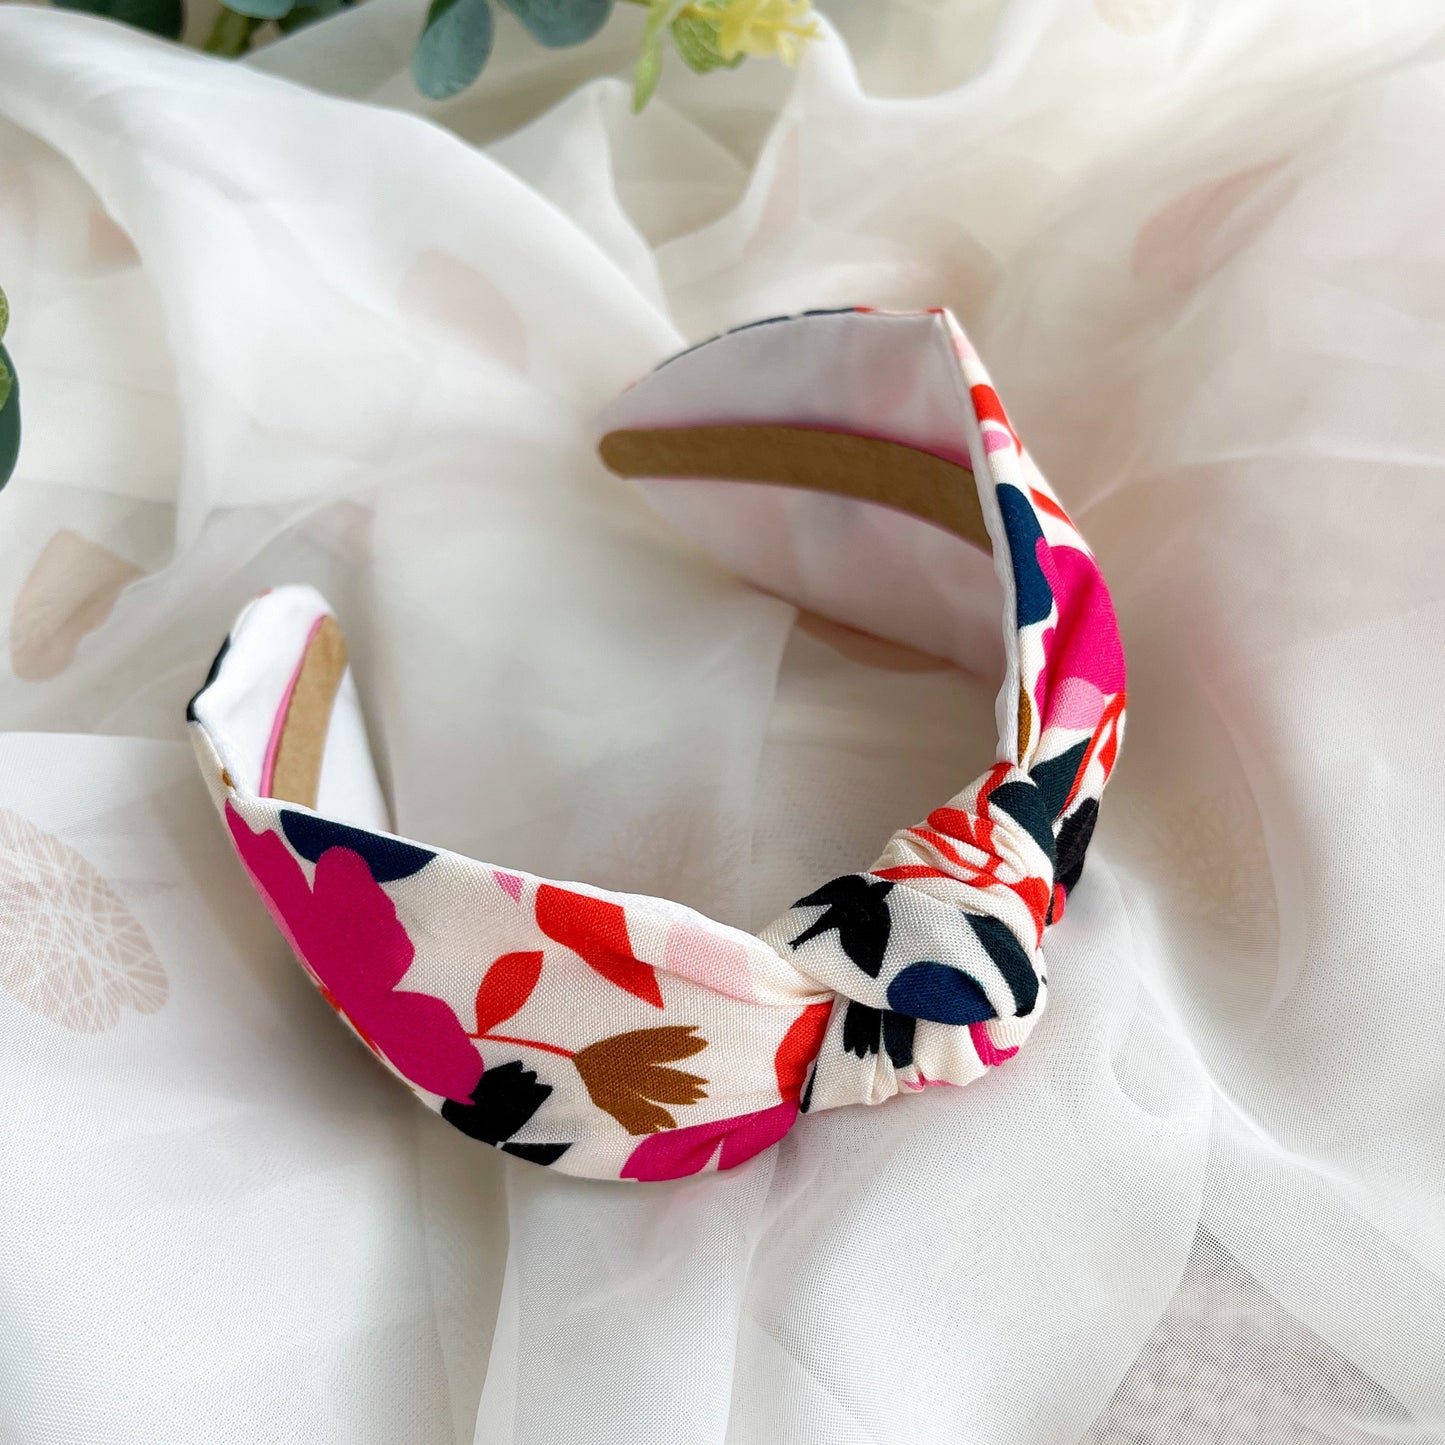 Colourful Floral Satin Lined Knot Headband